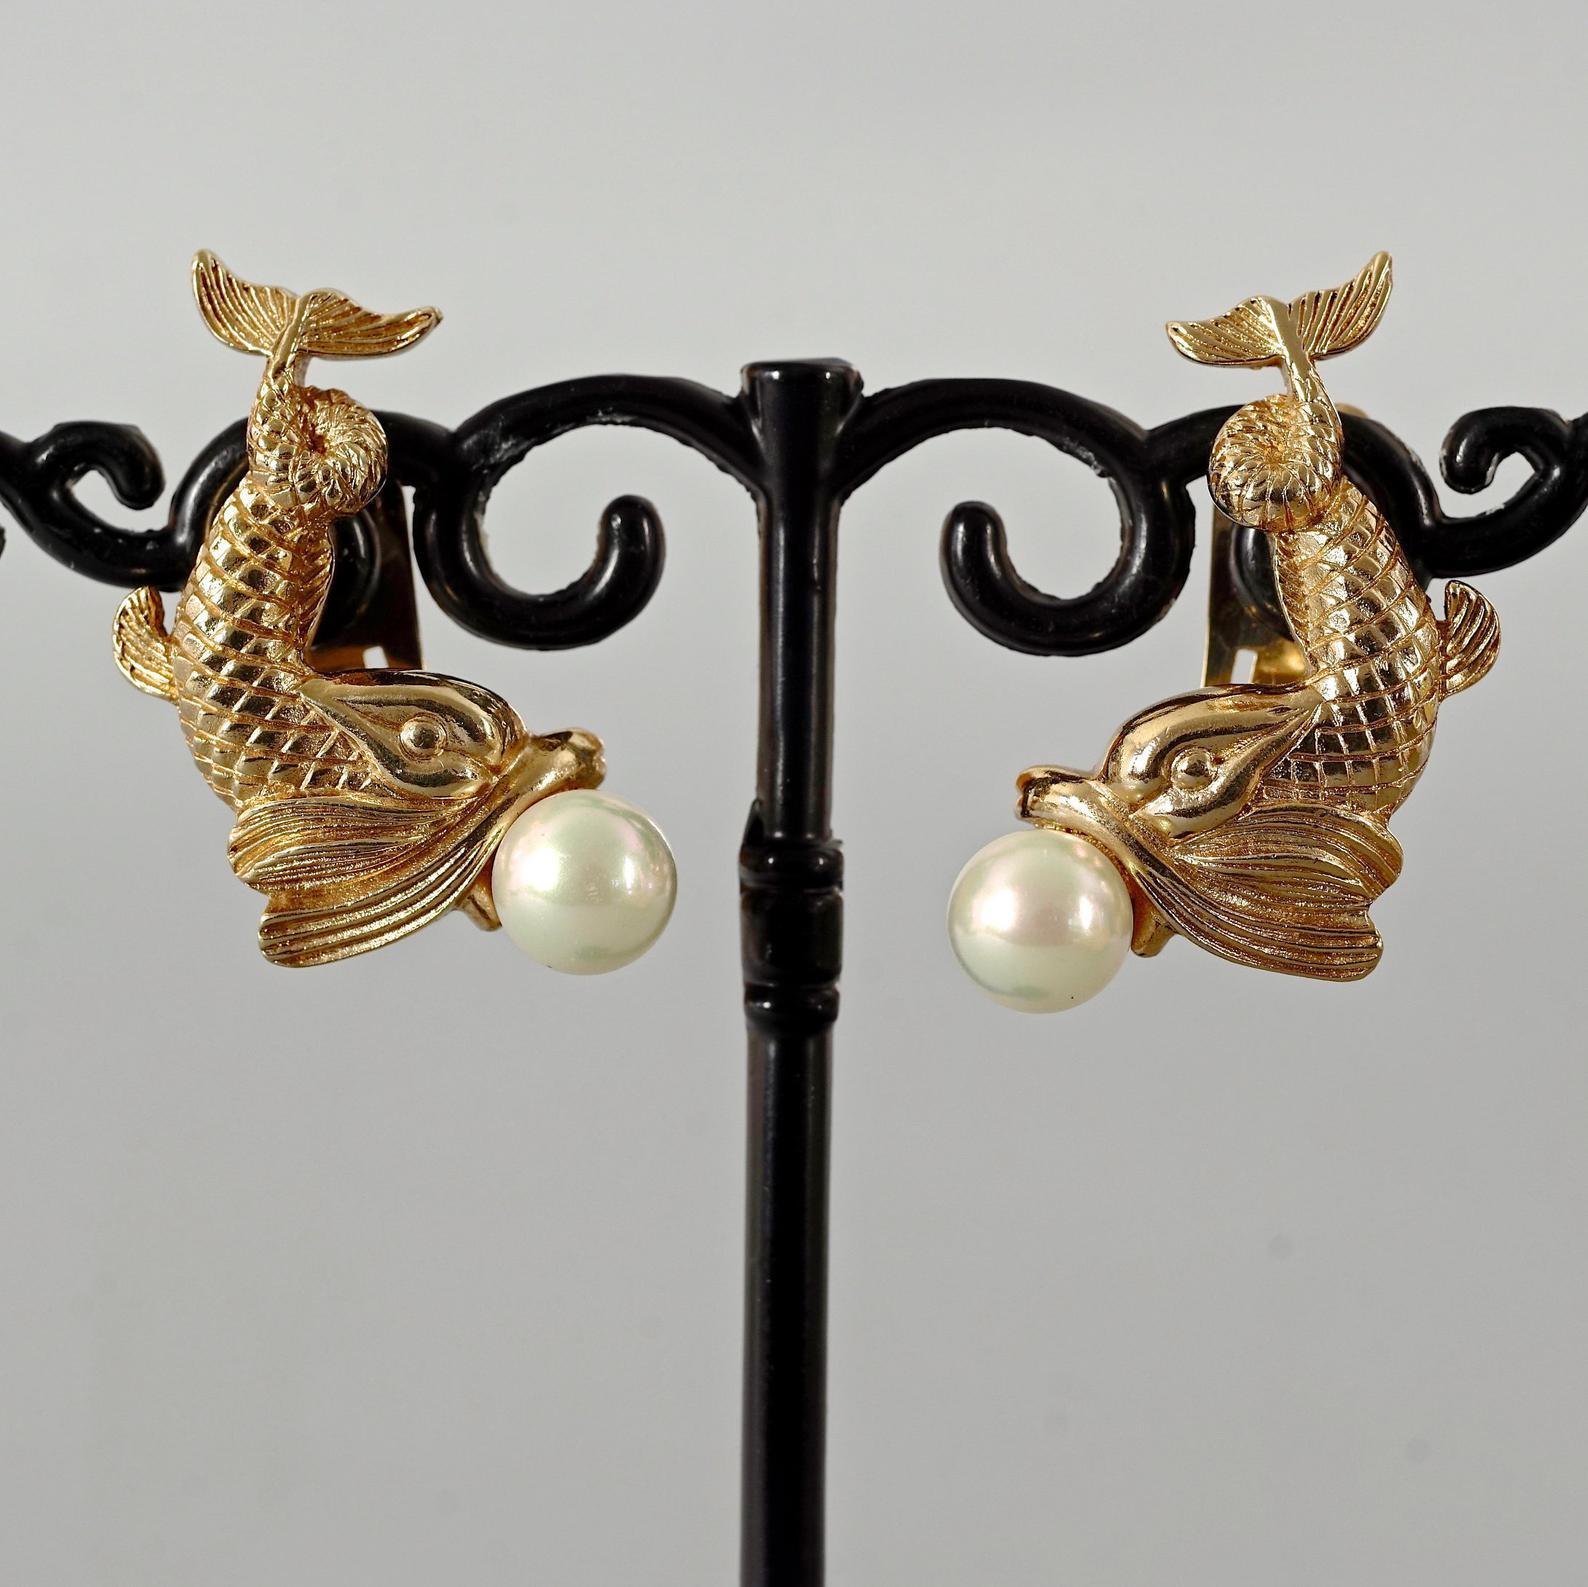 Vintage CHRISTIAN DIOR Pearl Fish Earrings

Measurements:
Height: 1.45 inches (3.7 cm)
Width: 0.86 inch (2.2 cm)
Weight per Earring: 6 grams

Features:
- 100% Authentic CHRISTIAN DIOR.
- Detailed fish earrings with pearl embellishment.
- Signed CH